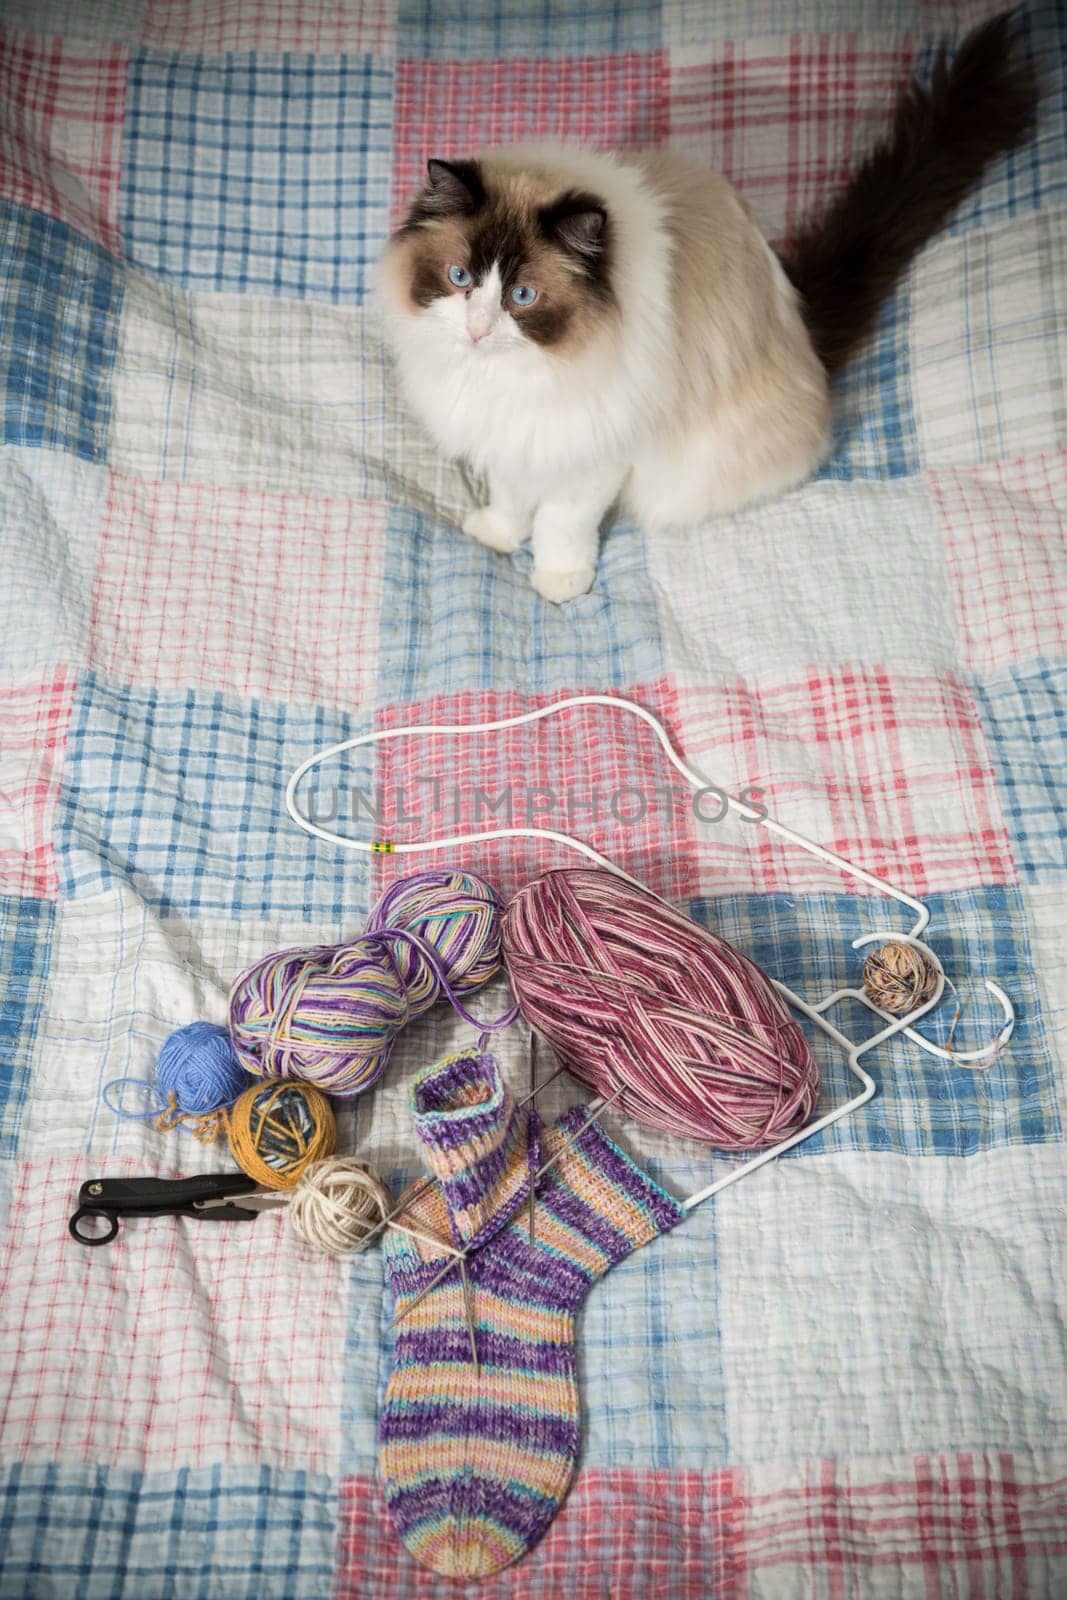 Colored threads, knitting needles and other items for hand knitting and a cute domestic cat Ragdoll by Rawlik